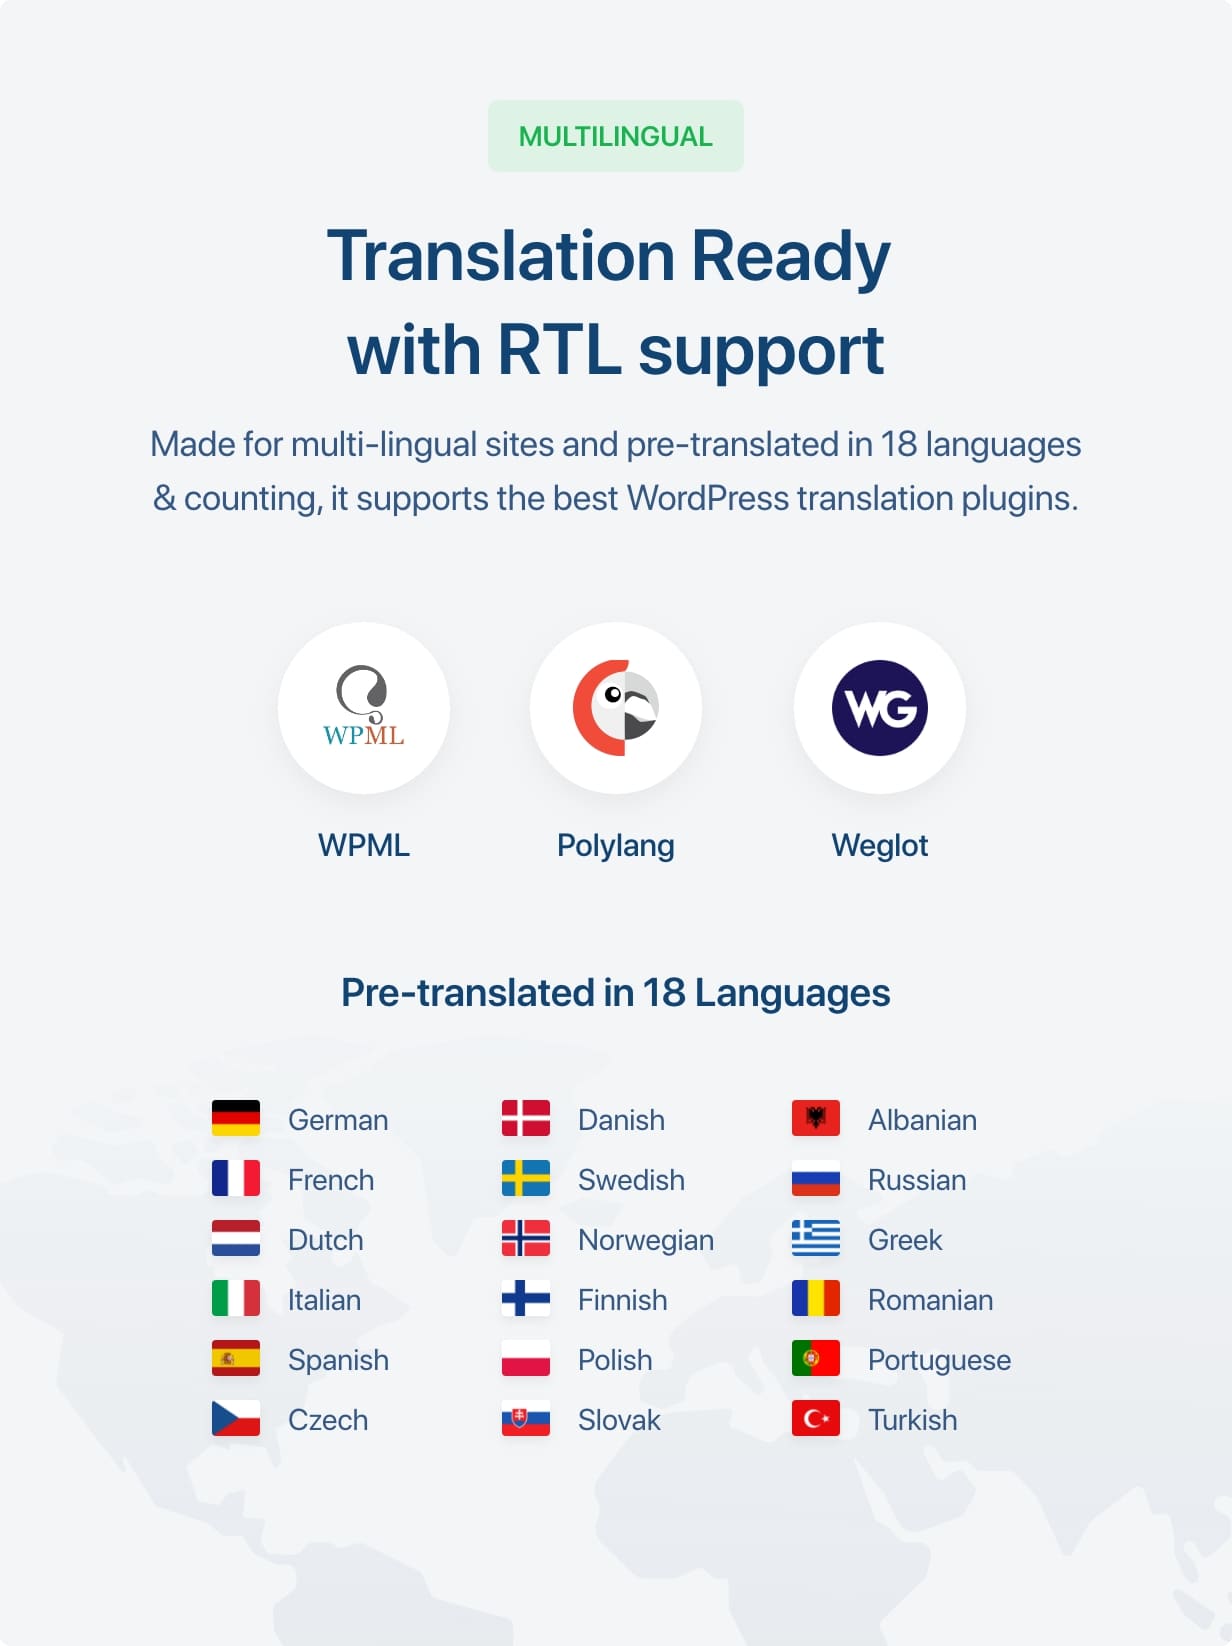 Translation Ready with RTL support included